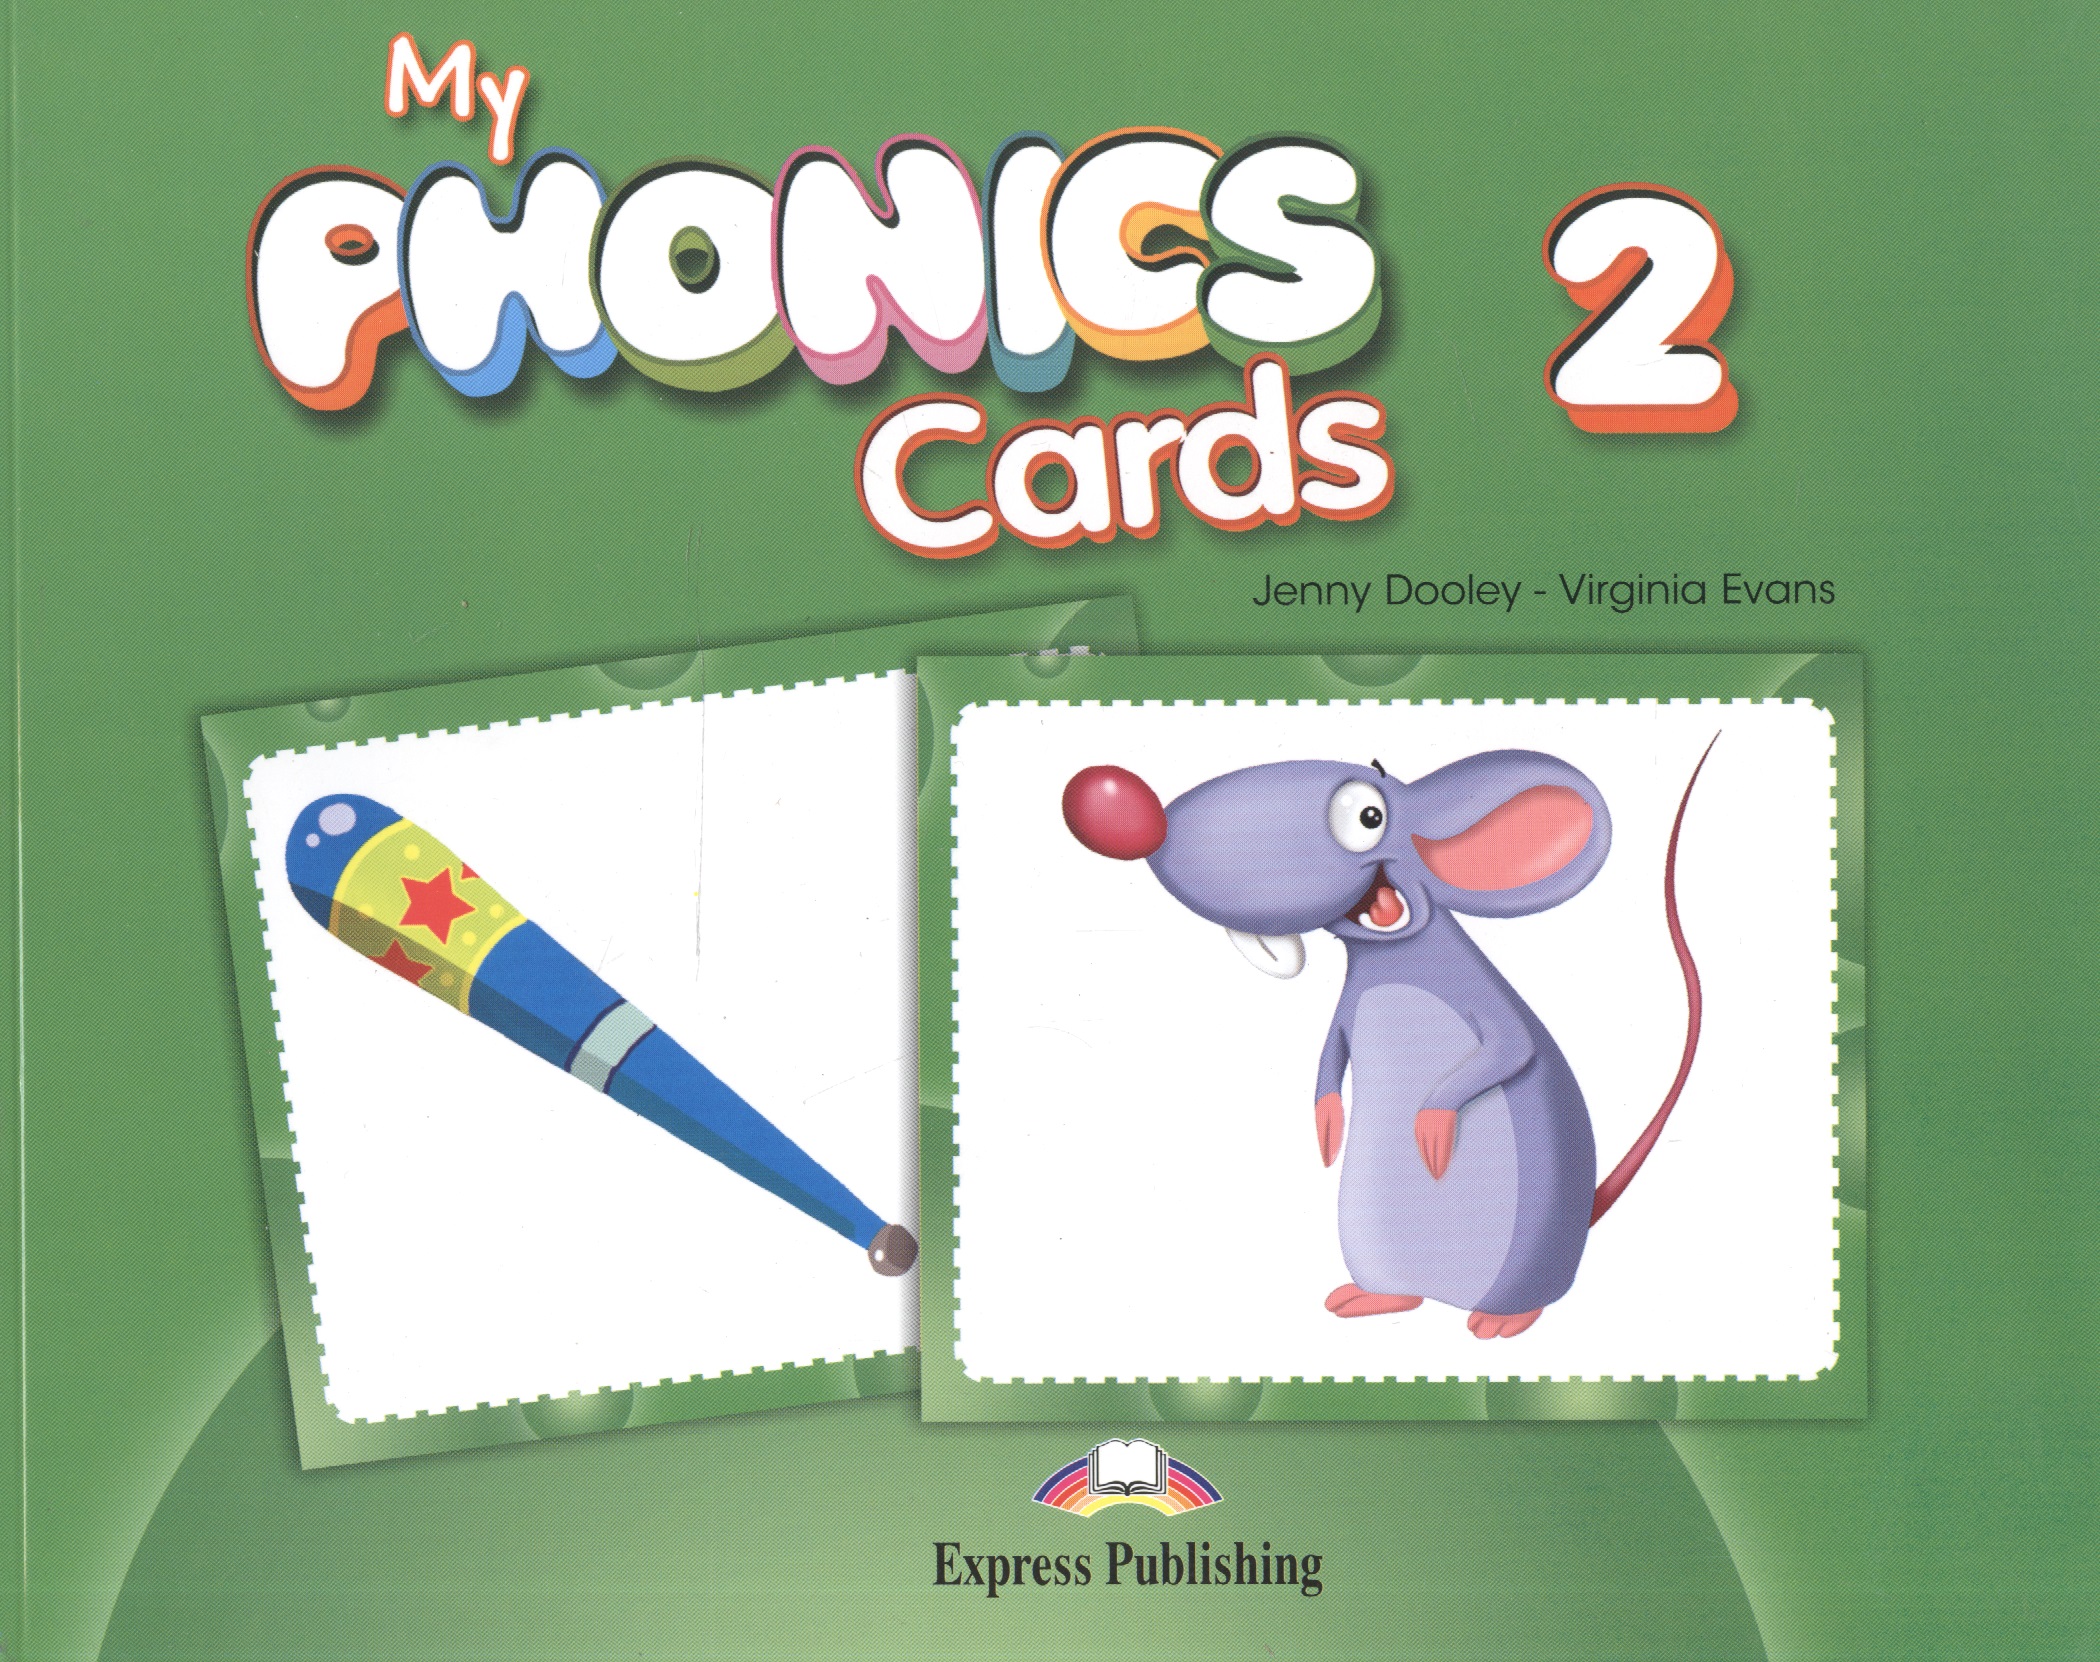 My Phonics 2. Cards team together 1 word cards